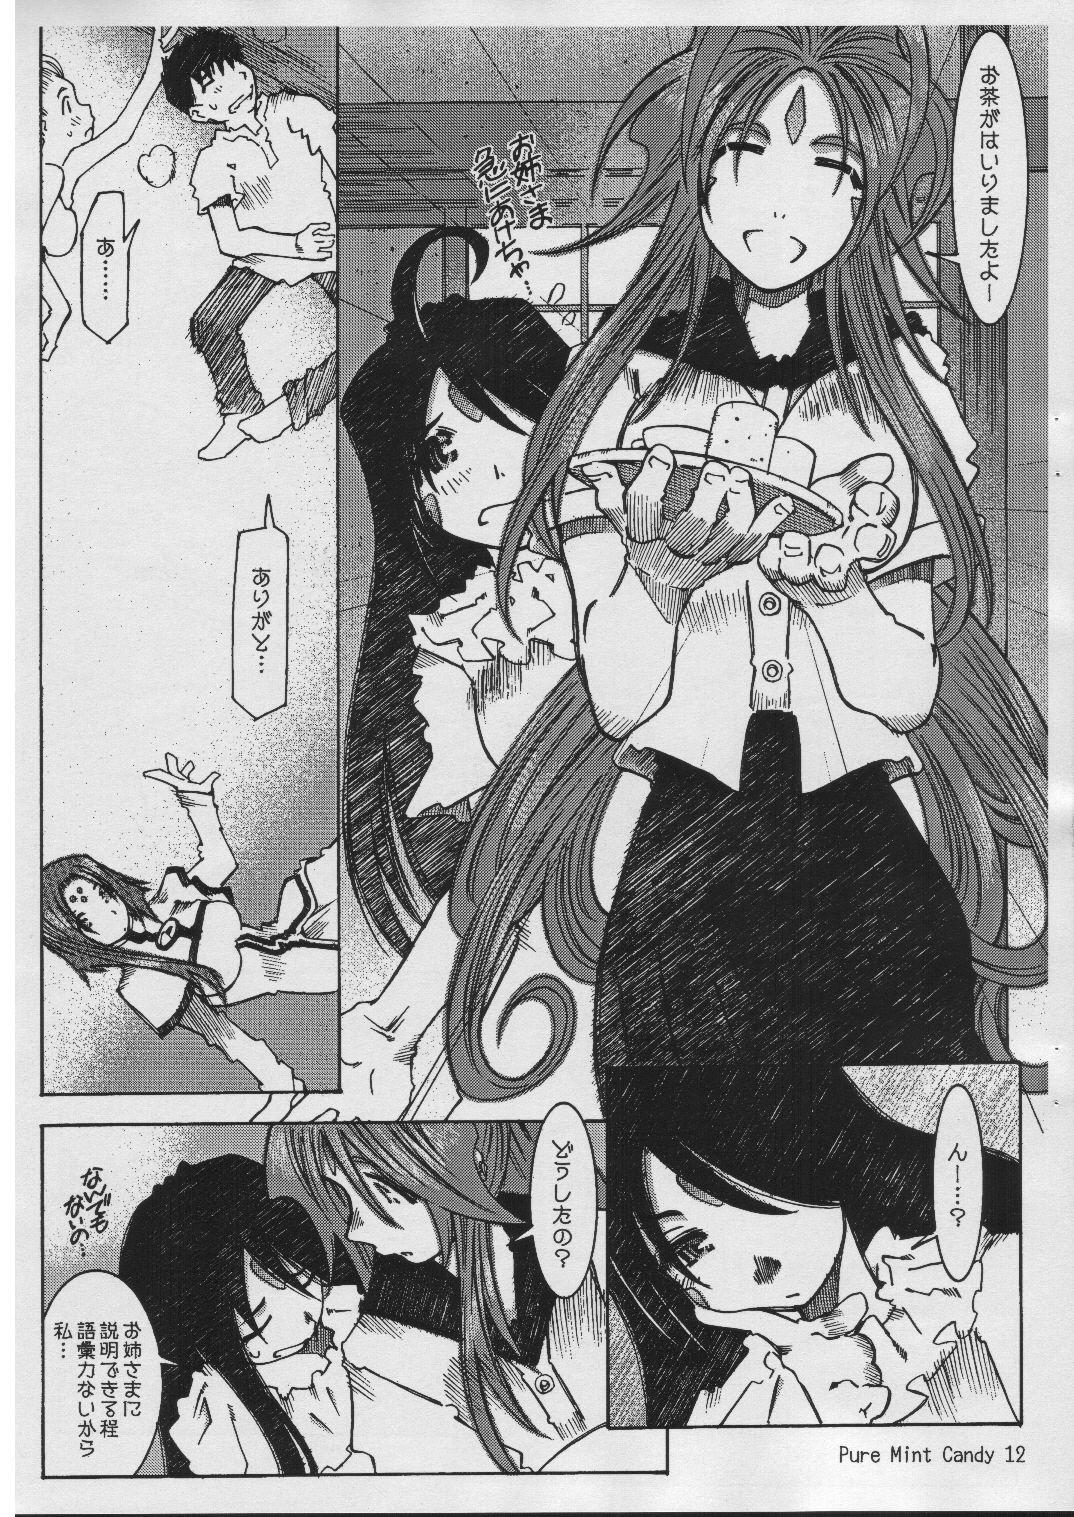 Brunet Pure Mint Candy - Ah my goddess Exposed - Page 12